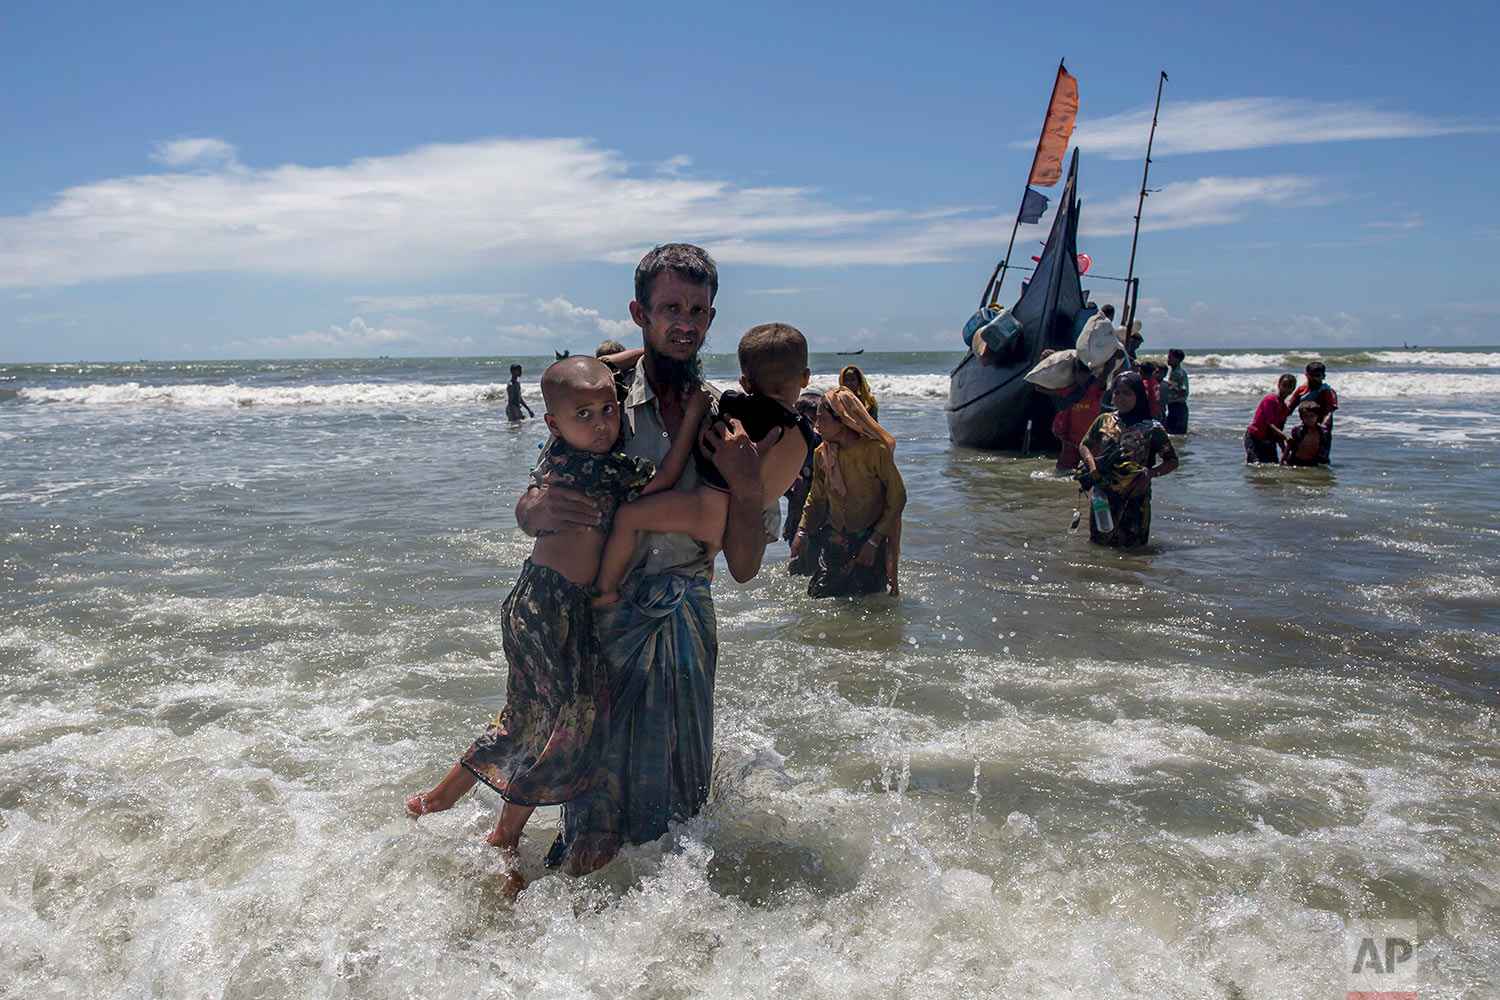 A Rohingya Muslim man walks to shore carrying two children after they arrived on a boat from Myanmar to Bangladesh in Shah Porir Dwip, Bangladesh, Thursday, Sept. 14, 2017. Those who arrived Wednesday in wooden boats described ongoing violence in Myanmar, where smoke could be seen billowing from a burning village, suggesting more Rohingya homes had been set alight. (AP Photo/Dar Yasin)